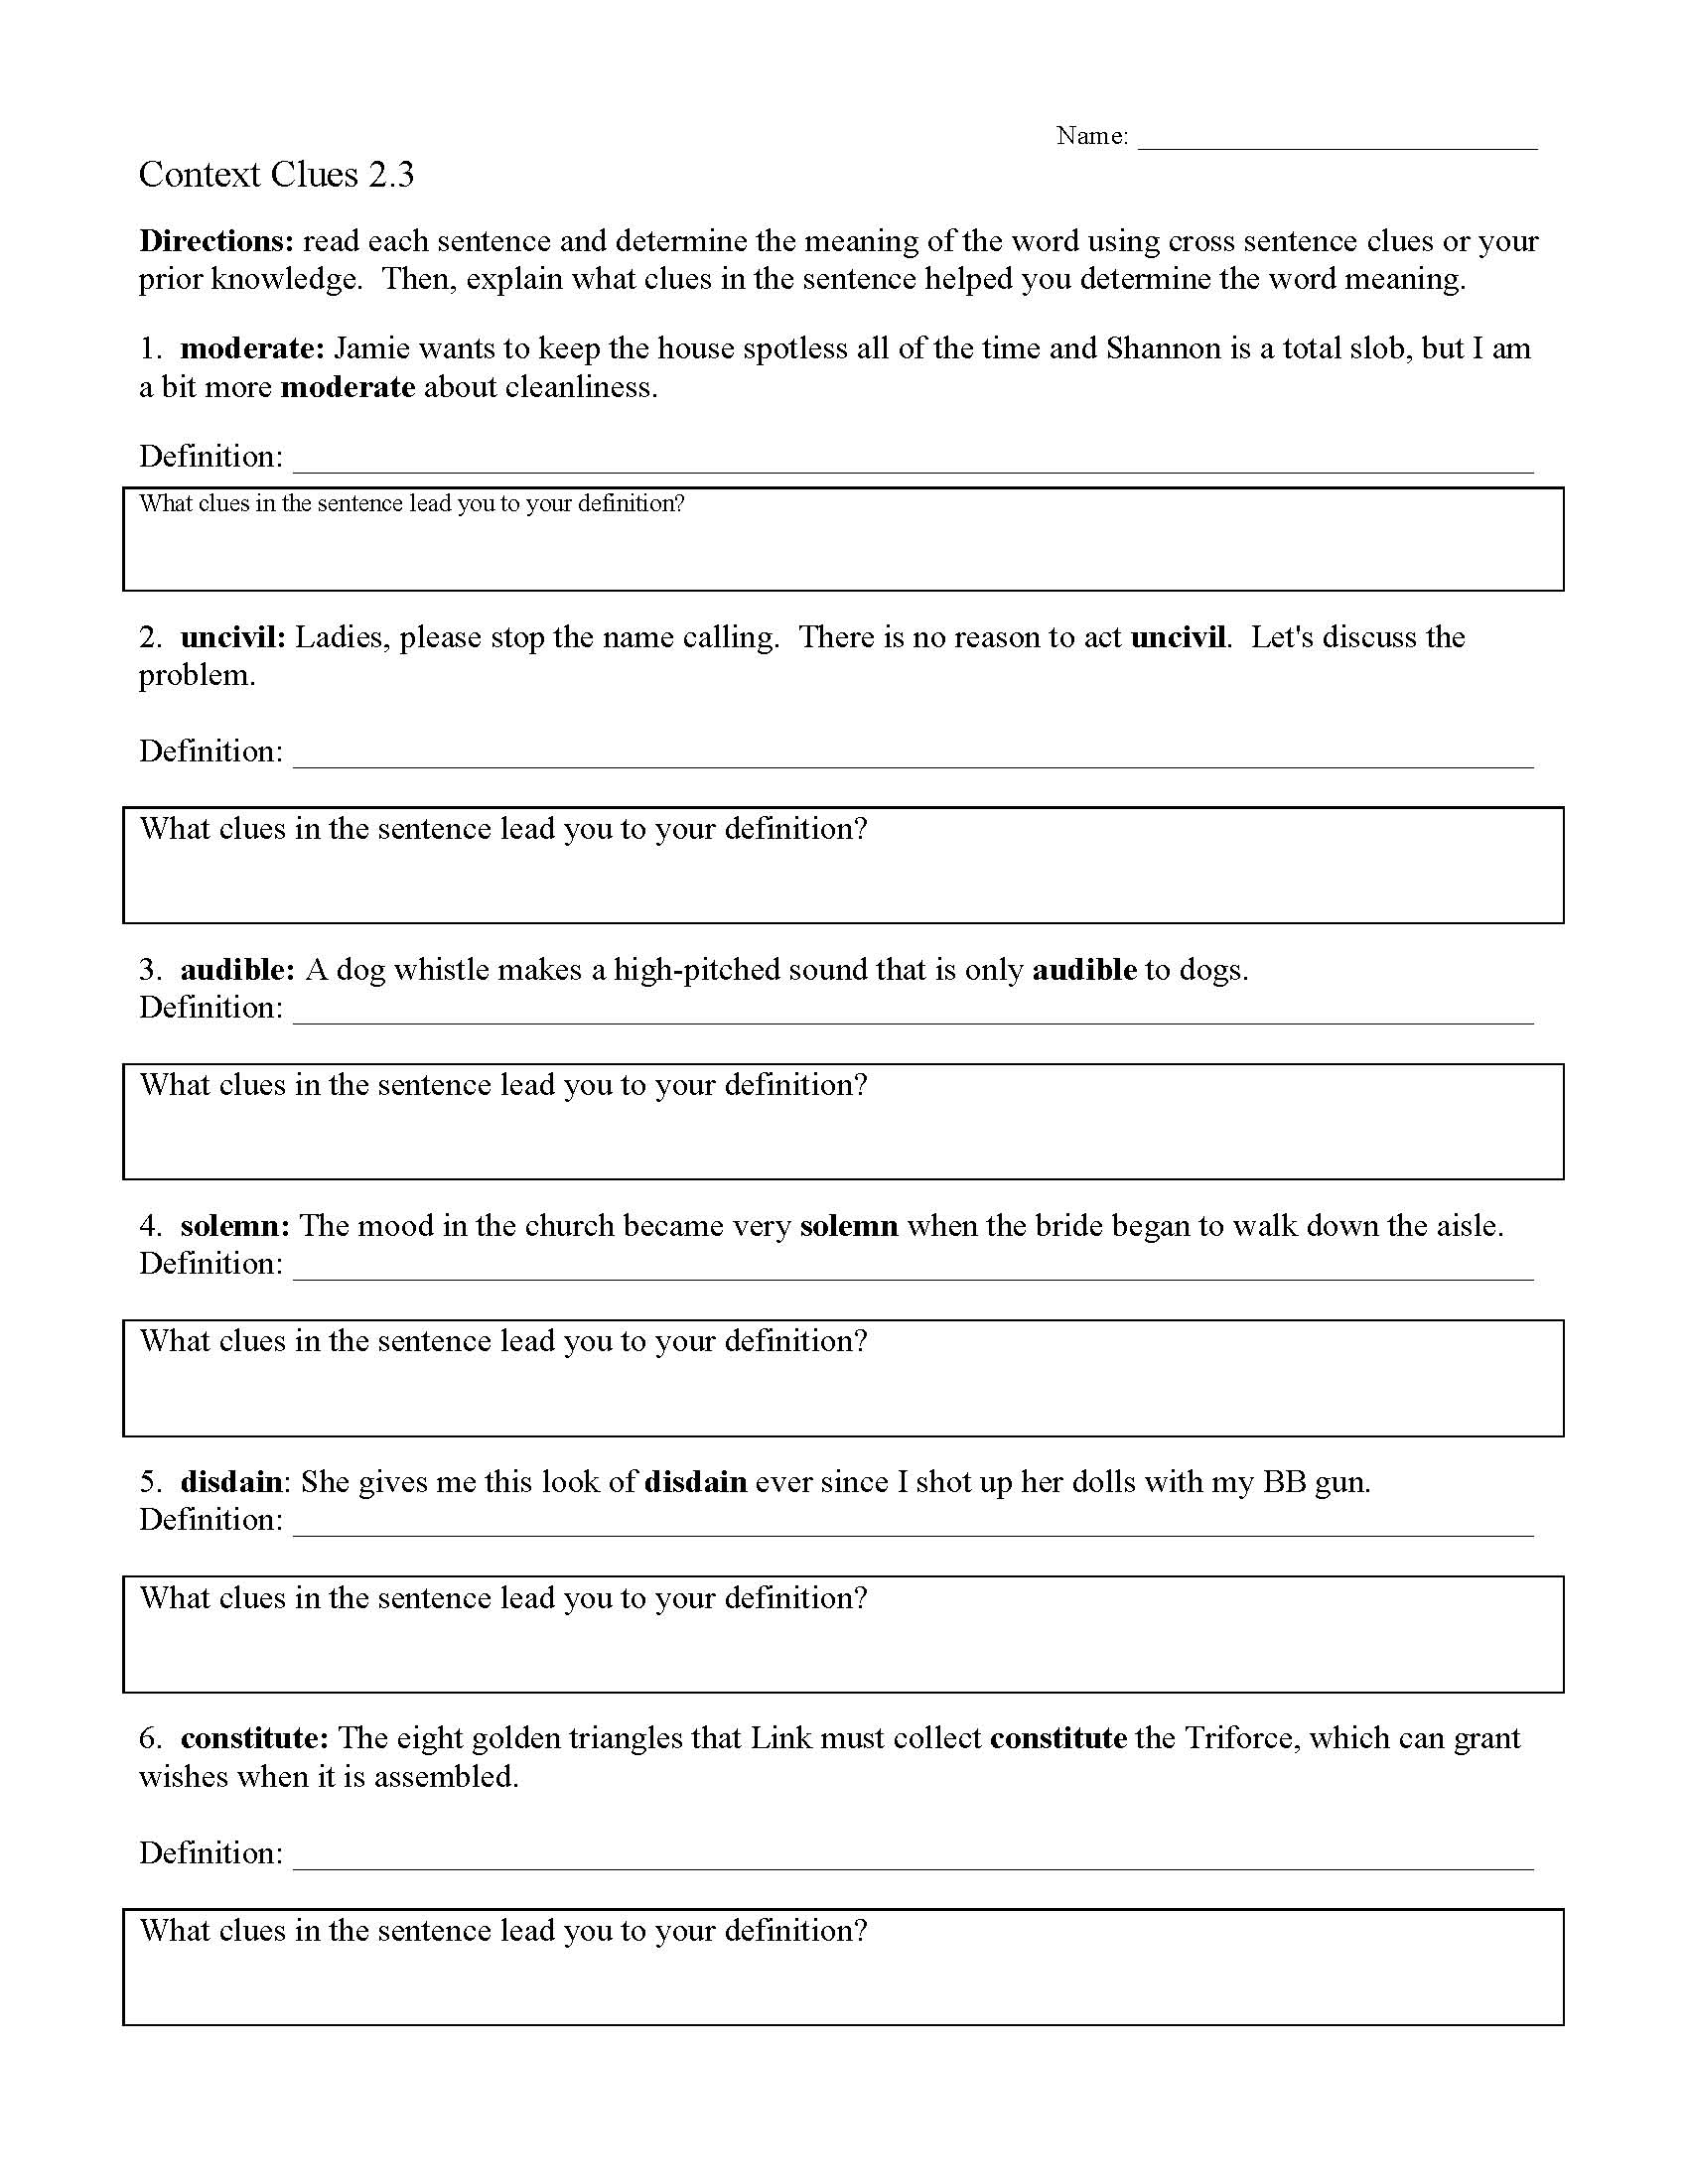 reading-comprehension-with-context-clues-worksheet